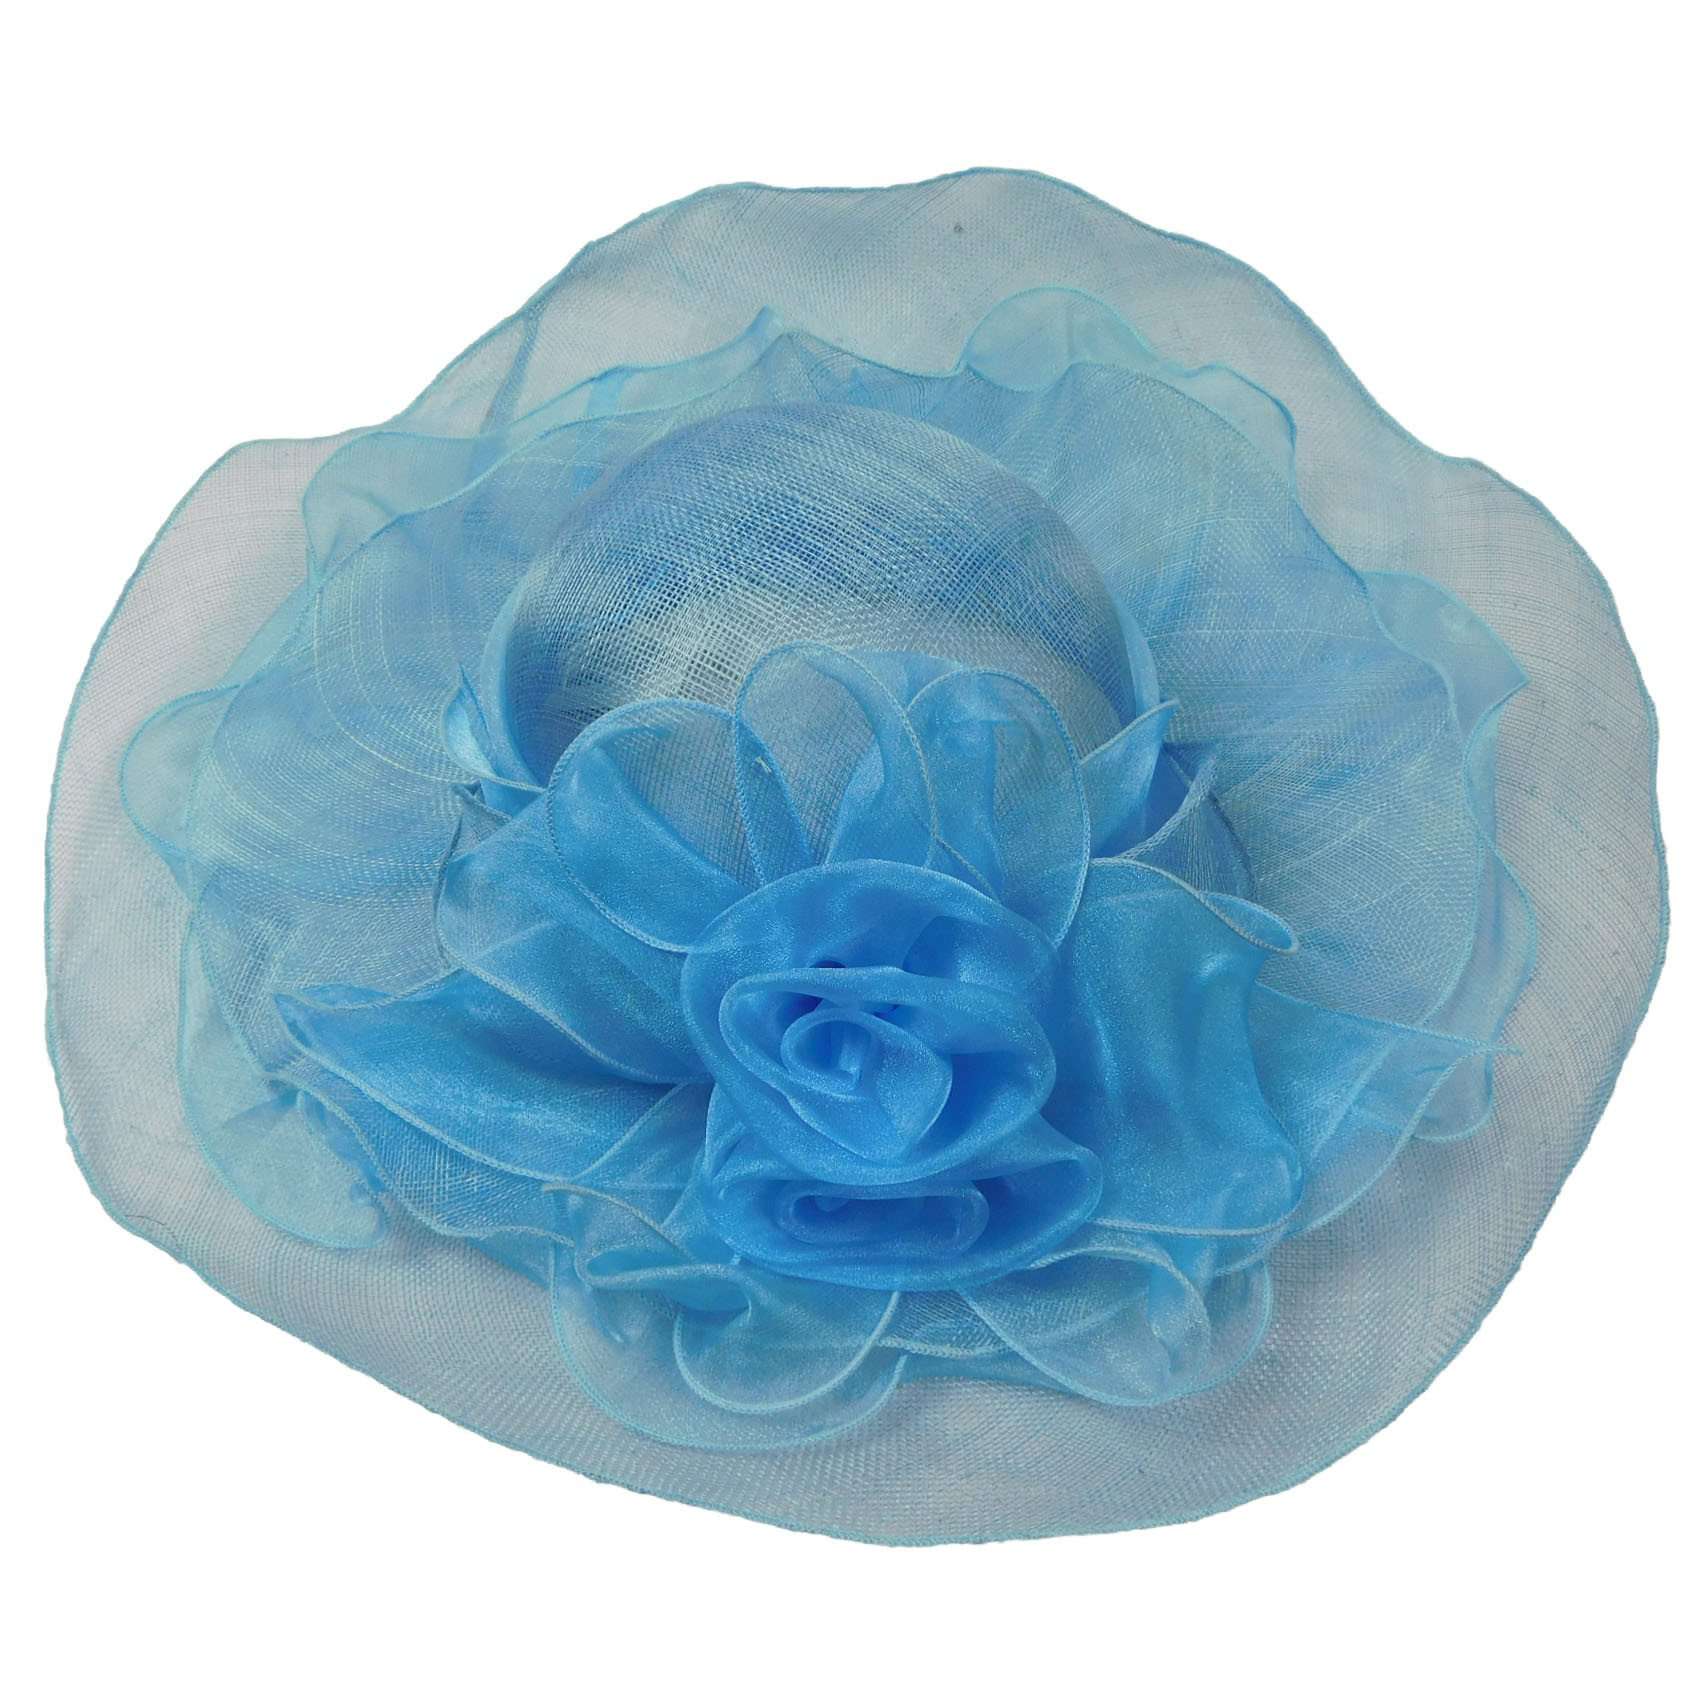 Sinamay Derby Hat with Ruffle Flower Accent Dress Hat Something Special LA WSSY786TQ Turquoise  